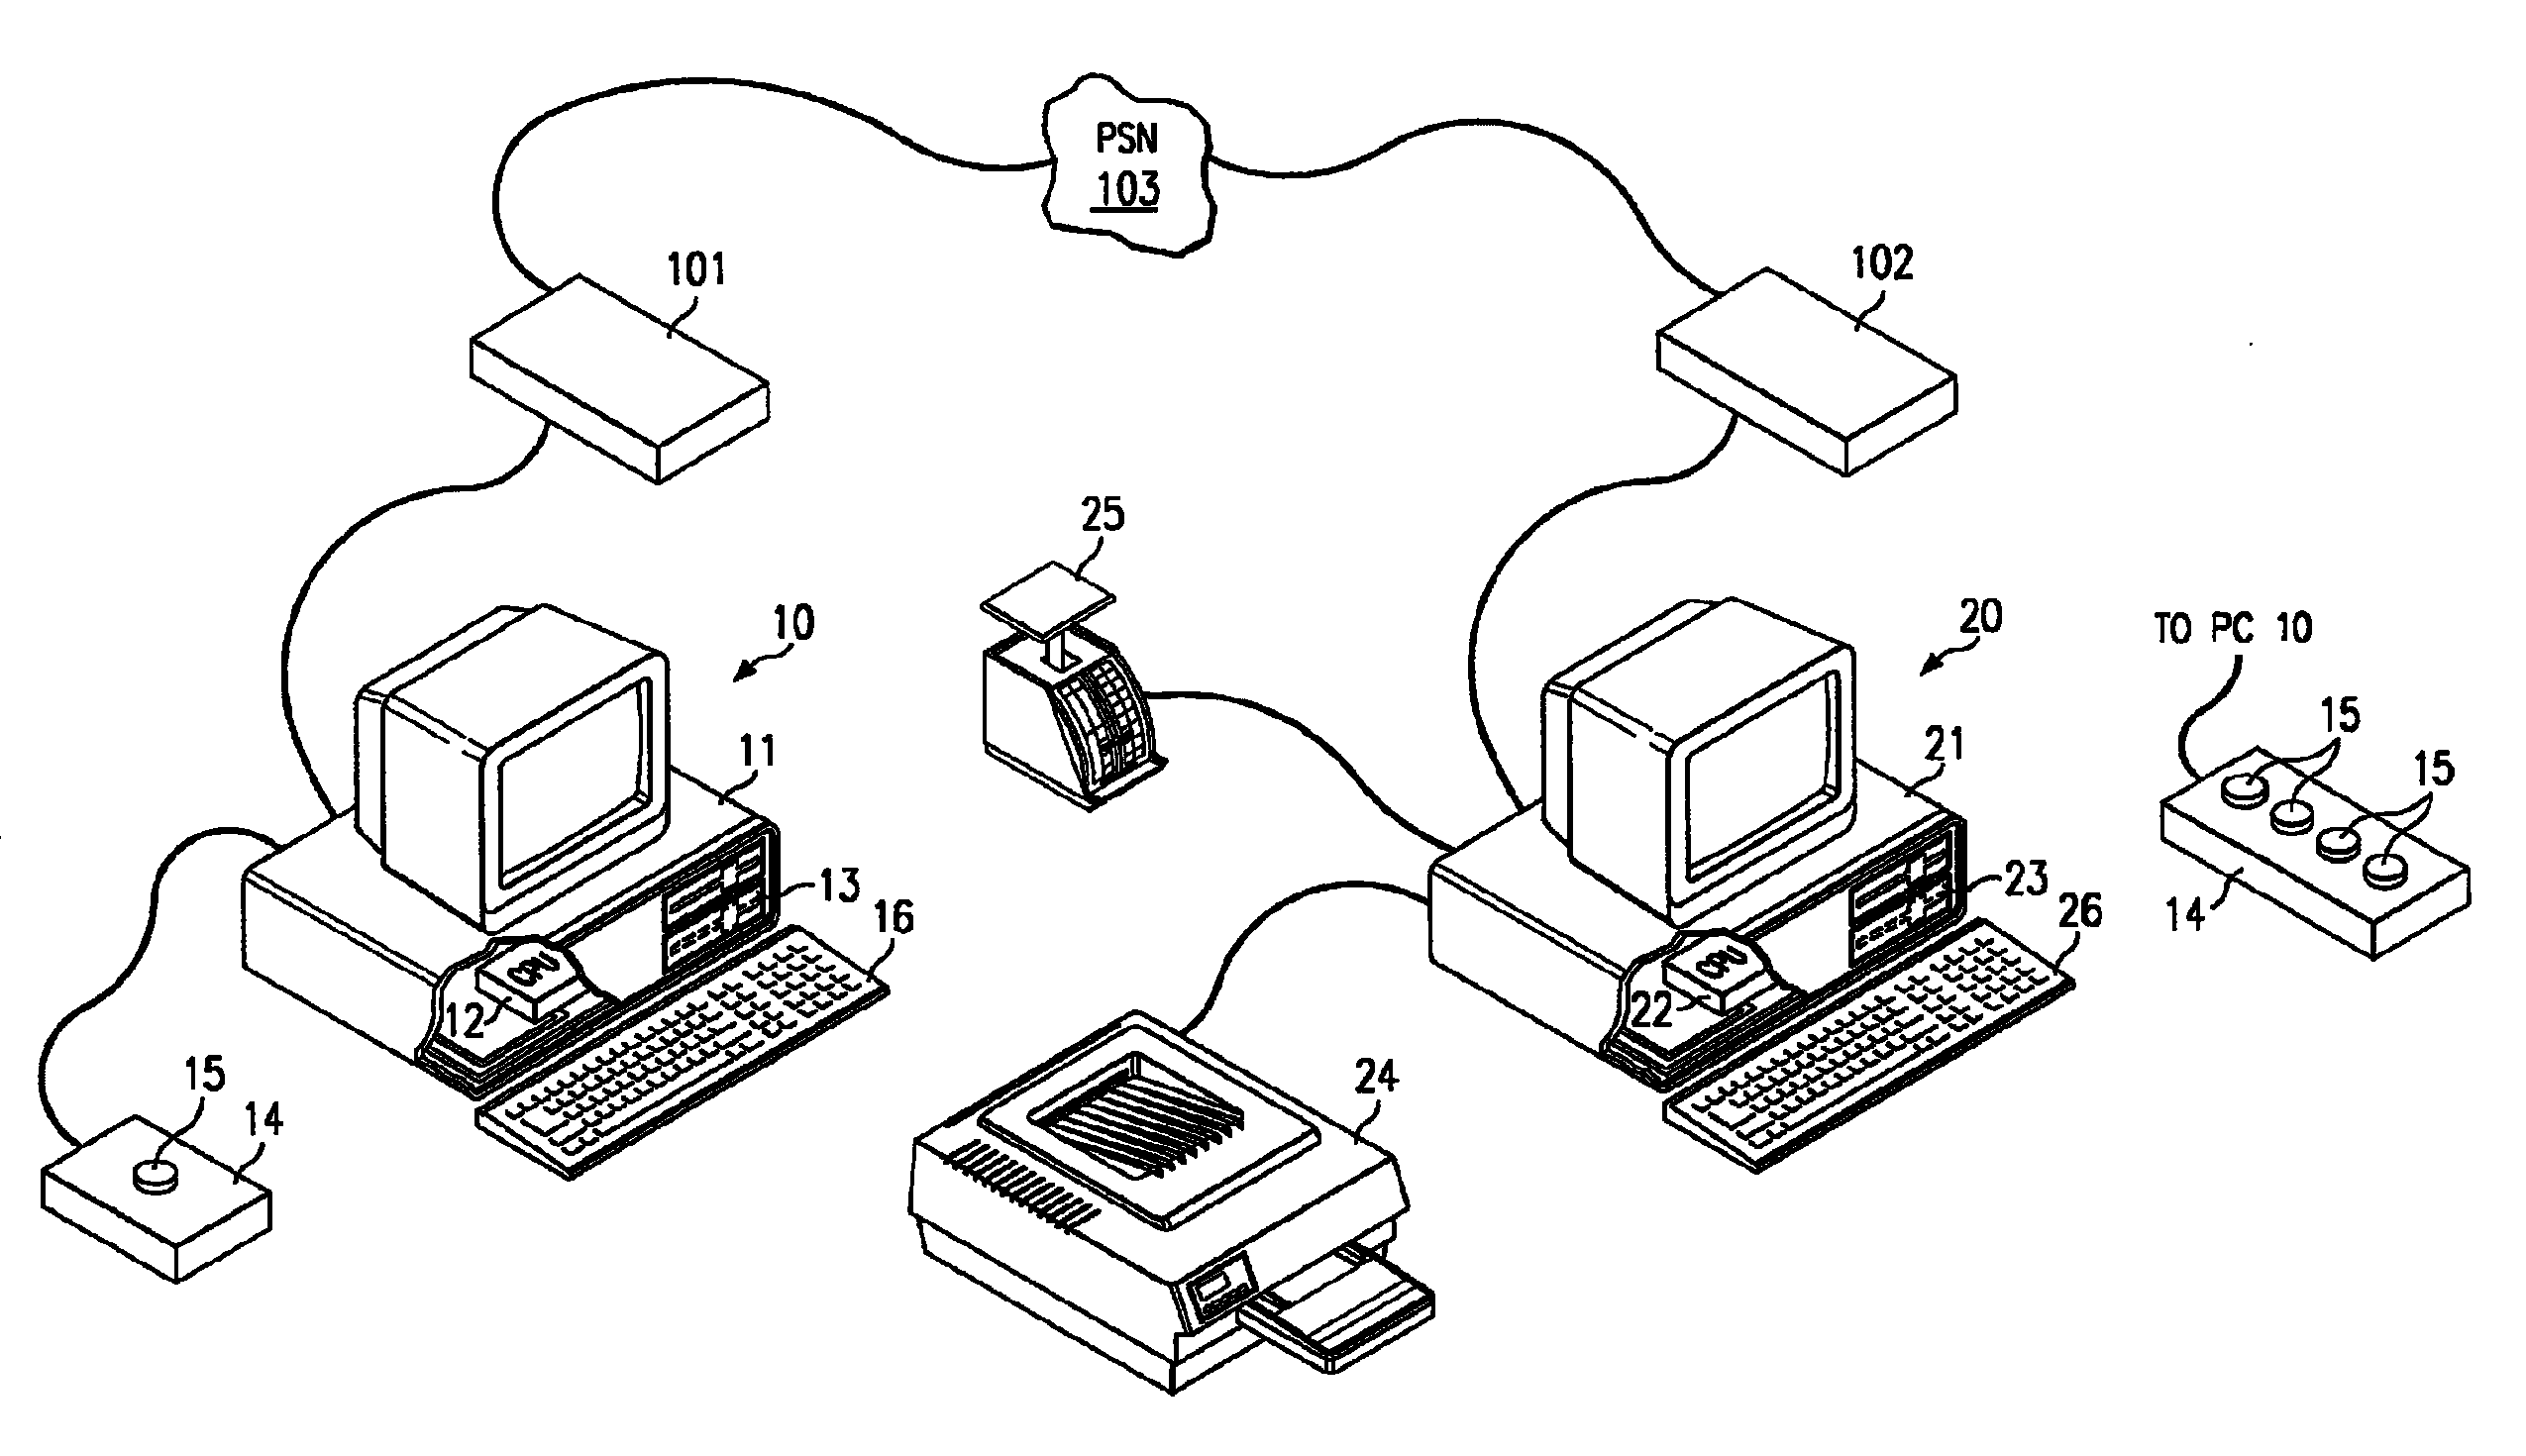 System and method for remote postage metering